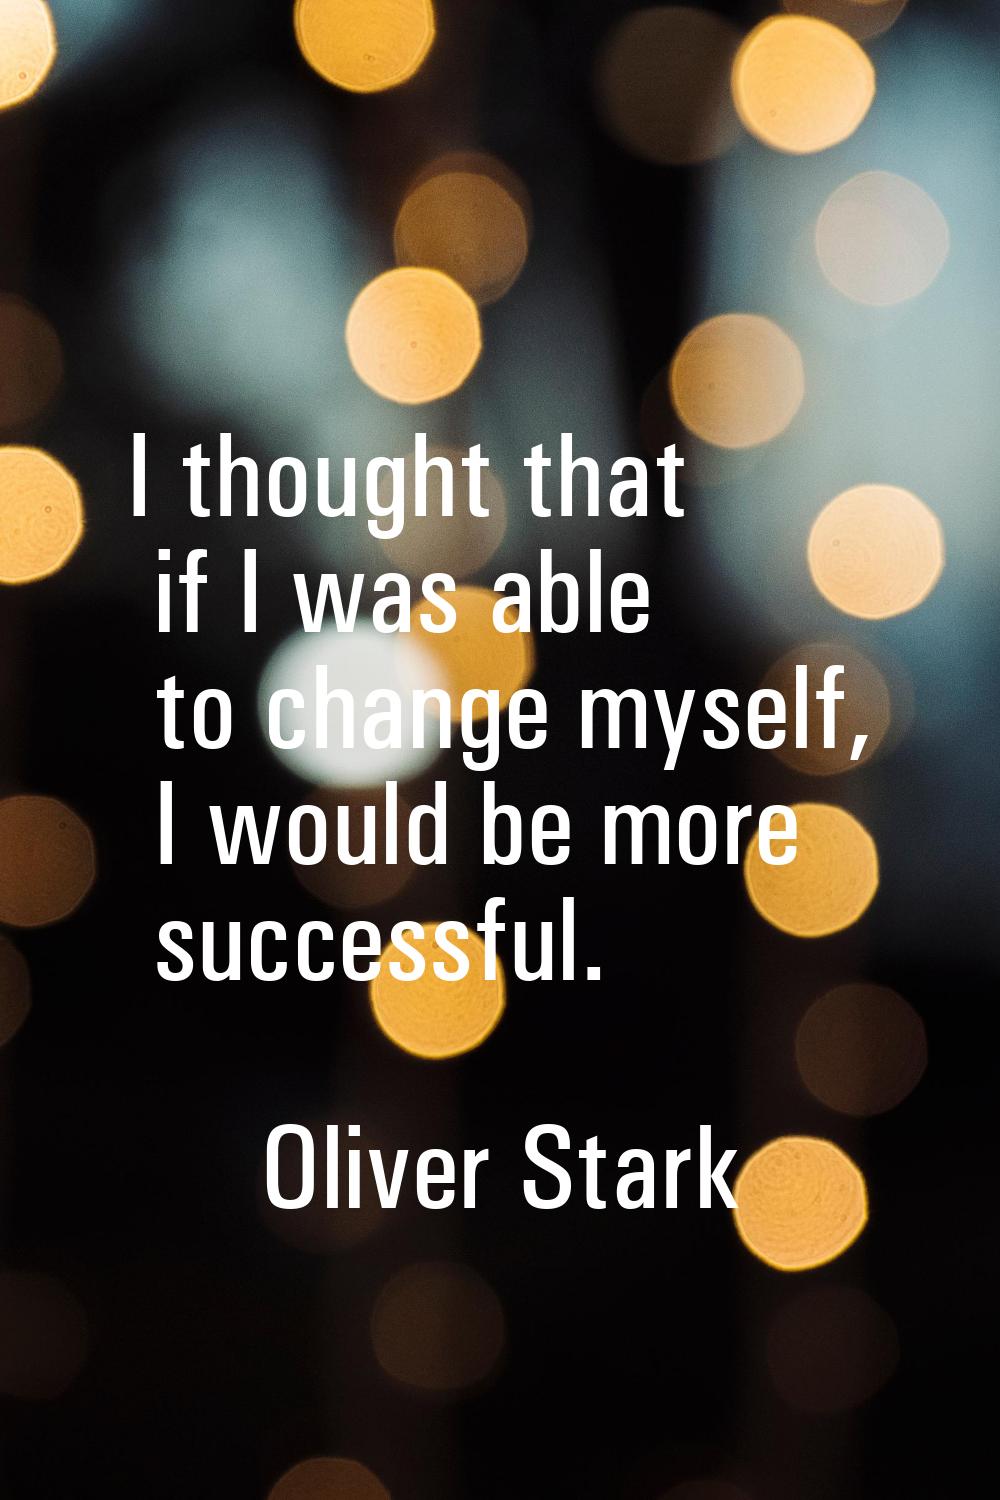 I thought that if I was able to change myself, I would be more successful.